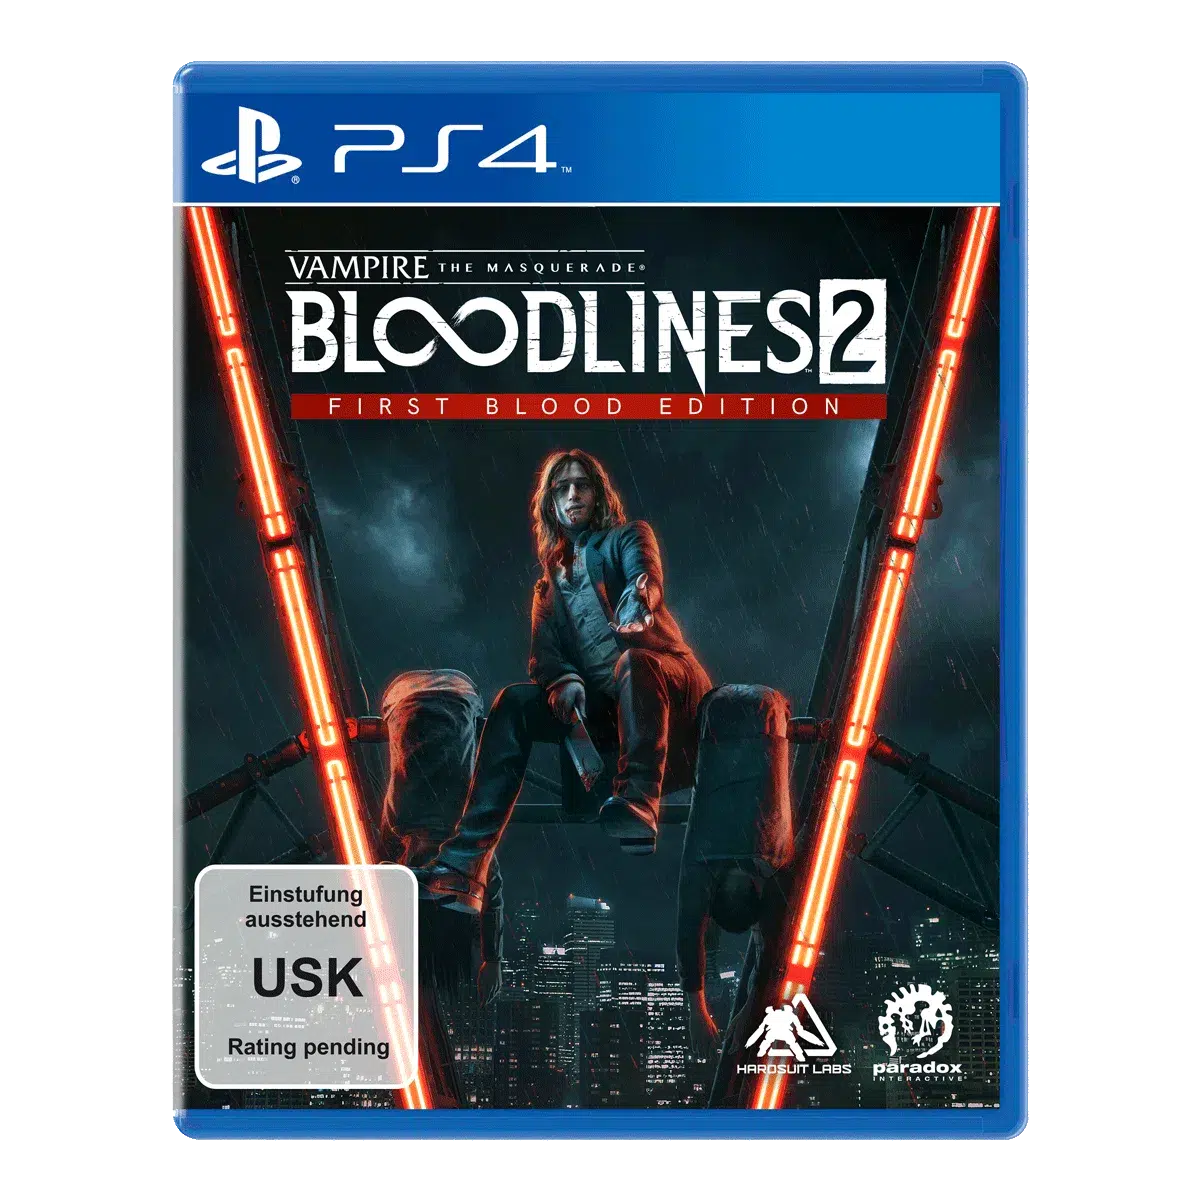 Vampire: The Masquerade Bloodlines 2 First Blood Edition - PS4